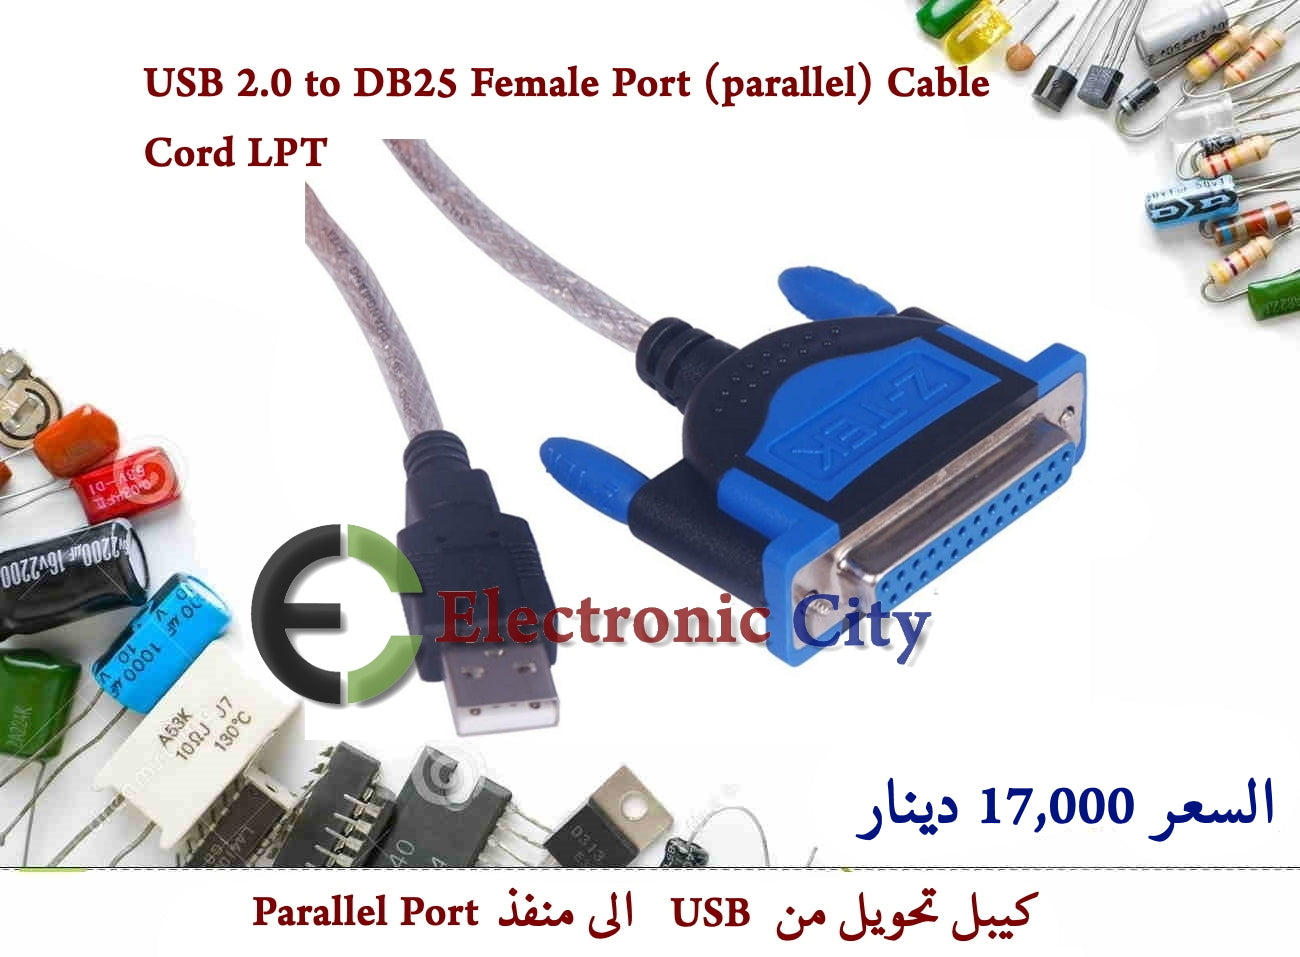 USB 2.0 to DB25 Female Port (parallel) Cable Cord LPT